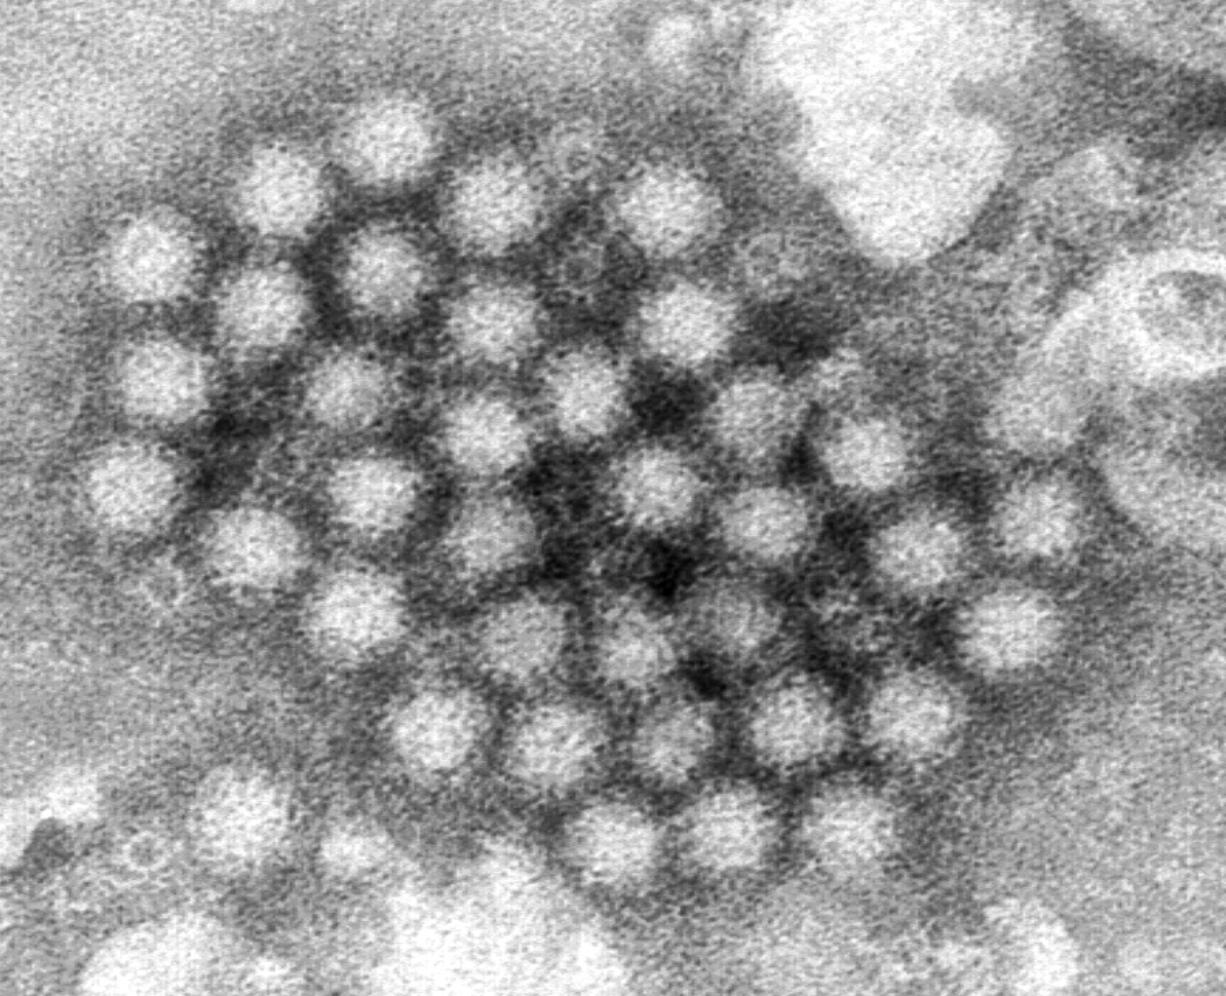 This electron microscope image provided by the Centers for Disease Control and Prevention shows a cluster of norovirus virions. (charles d.